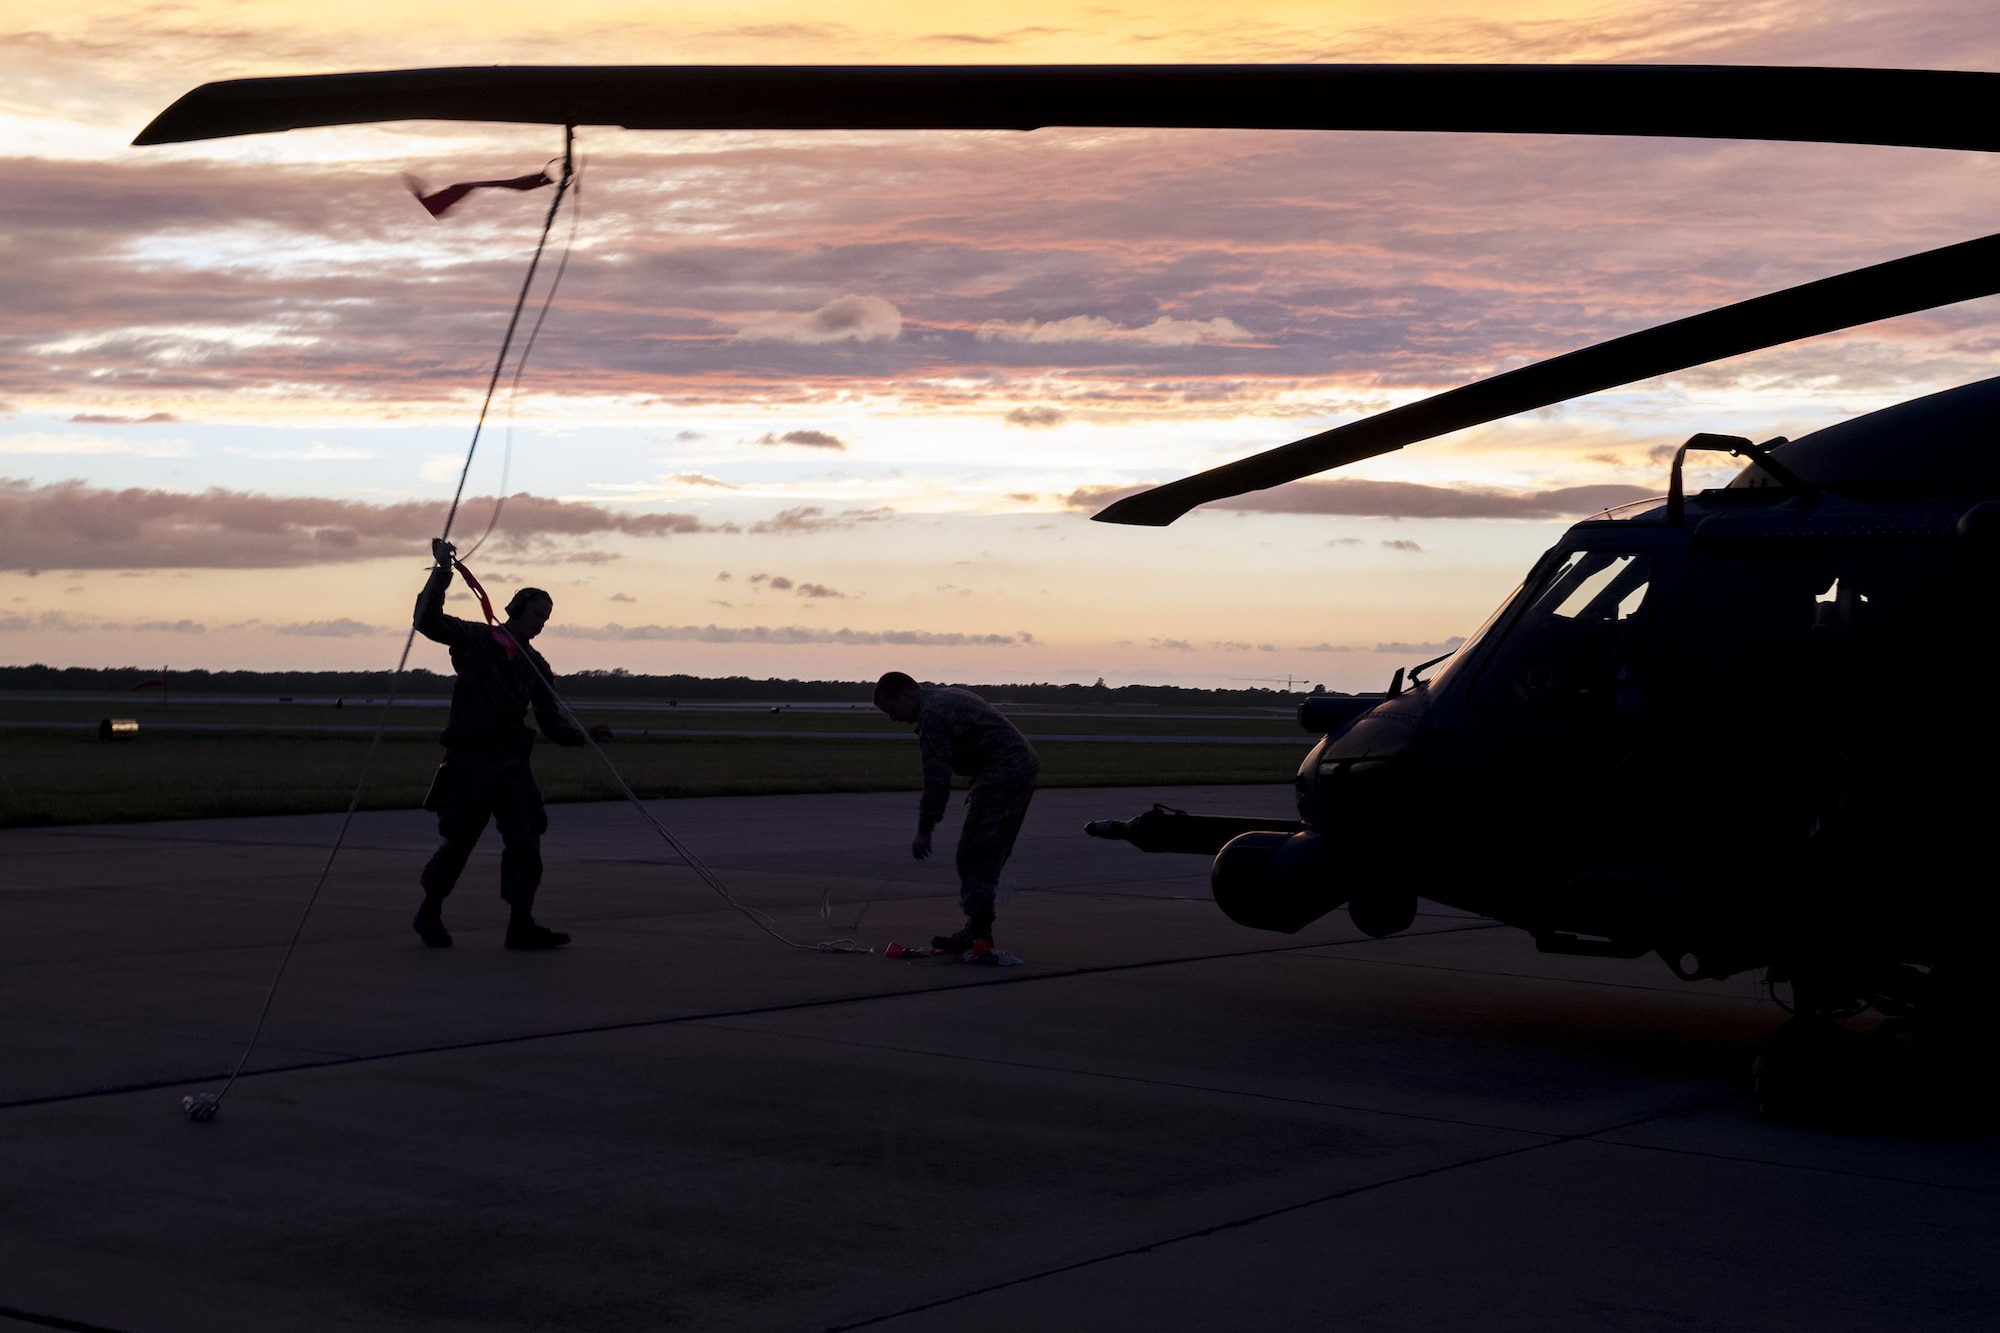 Airmen from the 41st Helicopter Maintenance Unit secure a rotor blade, Aug. 28, 2017, at Easterwood Airport in College Station, Texas. The 347th Rescue Group from Moody Air Force Base, Ga. sent aircraft and in support of Air Forces Northern as part of Northern Command's support of FEMA's disaster response efforts. (U.S. Air Force photo by Tech. Sgt. Zachary Wolf)